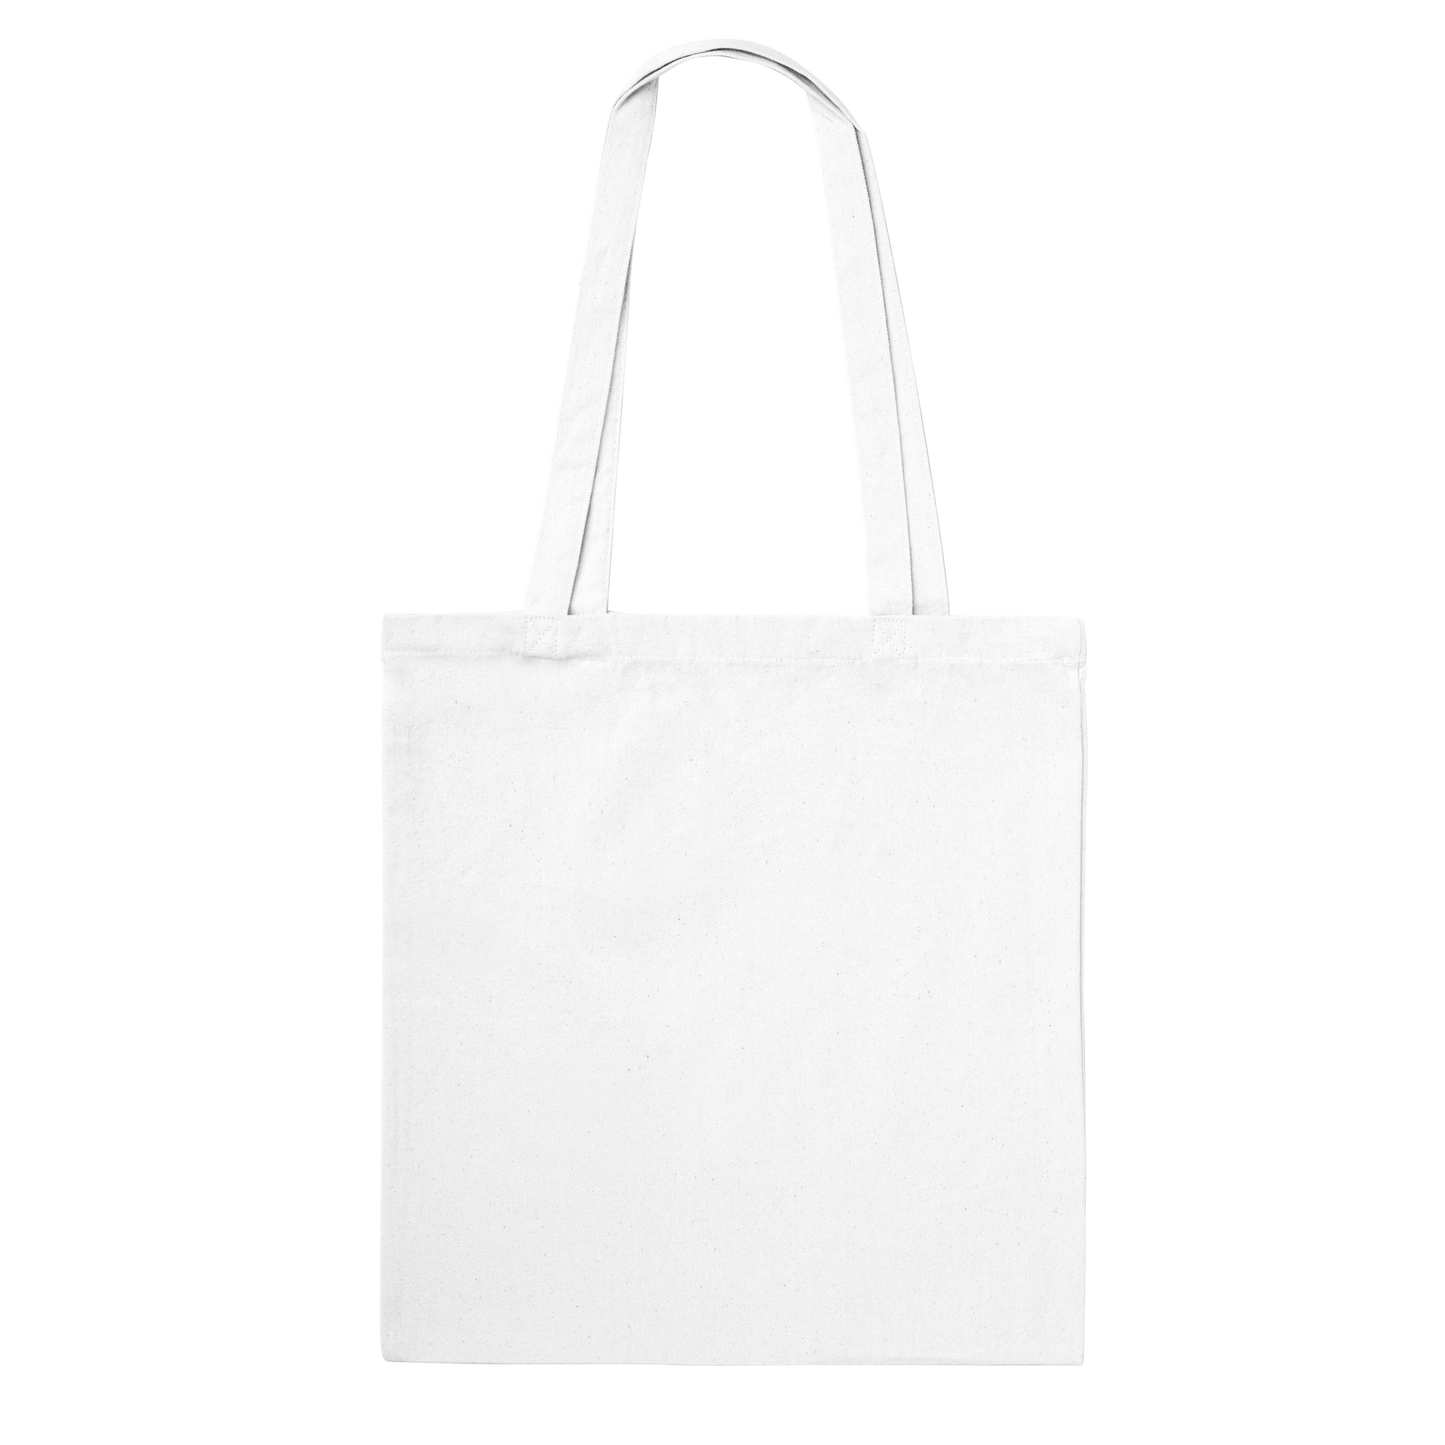 Remove greed catalyst Classic Tote Bag